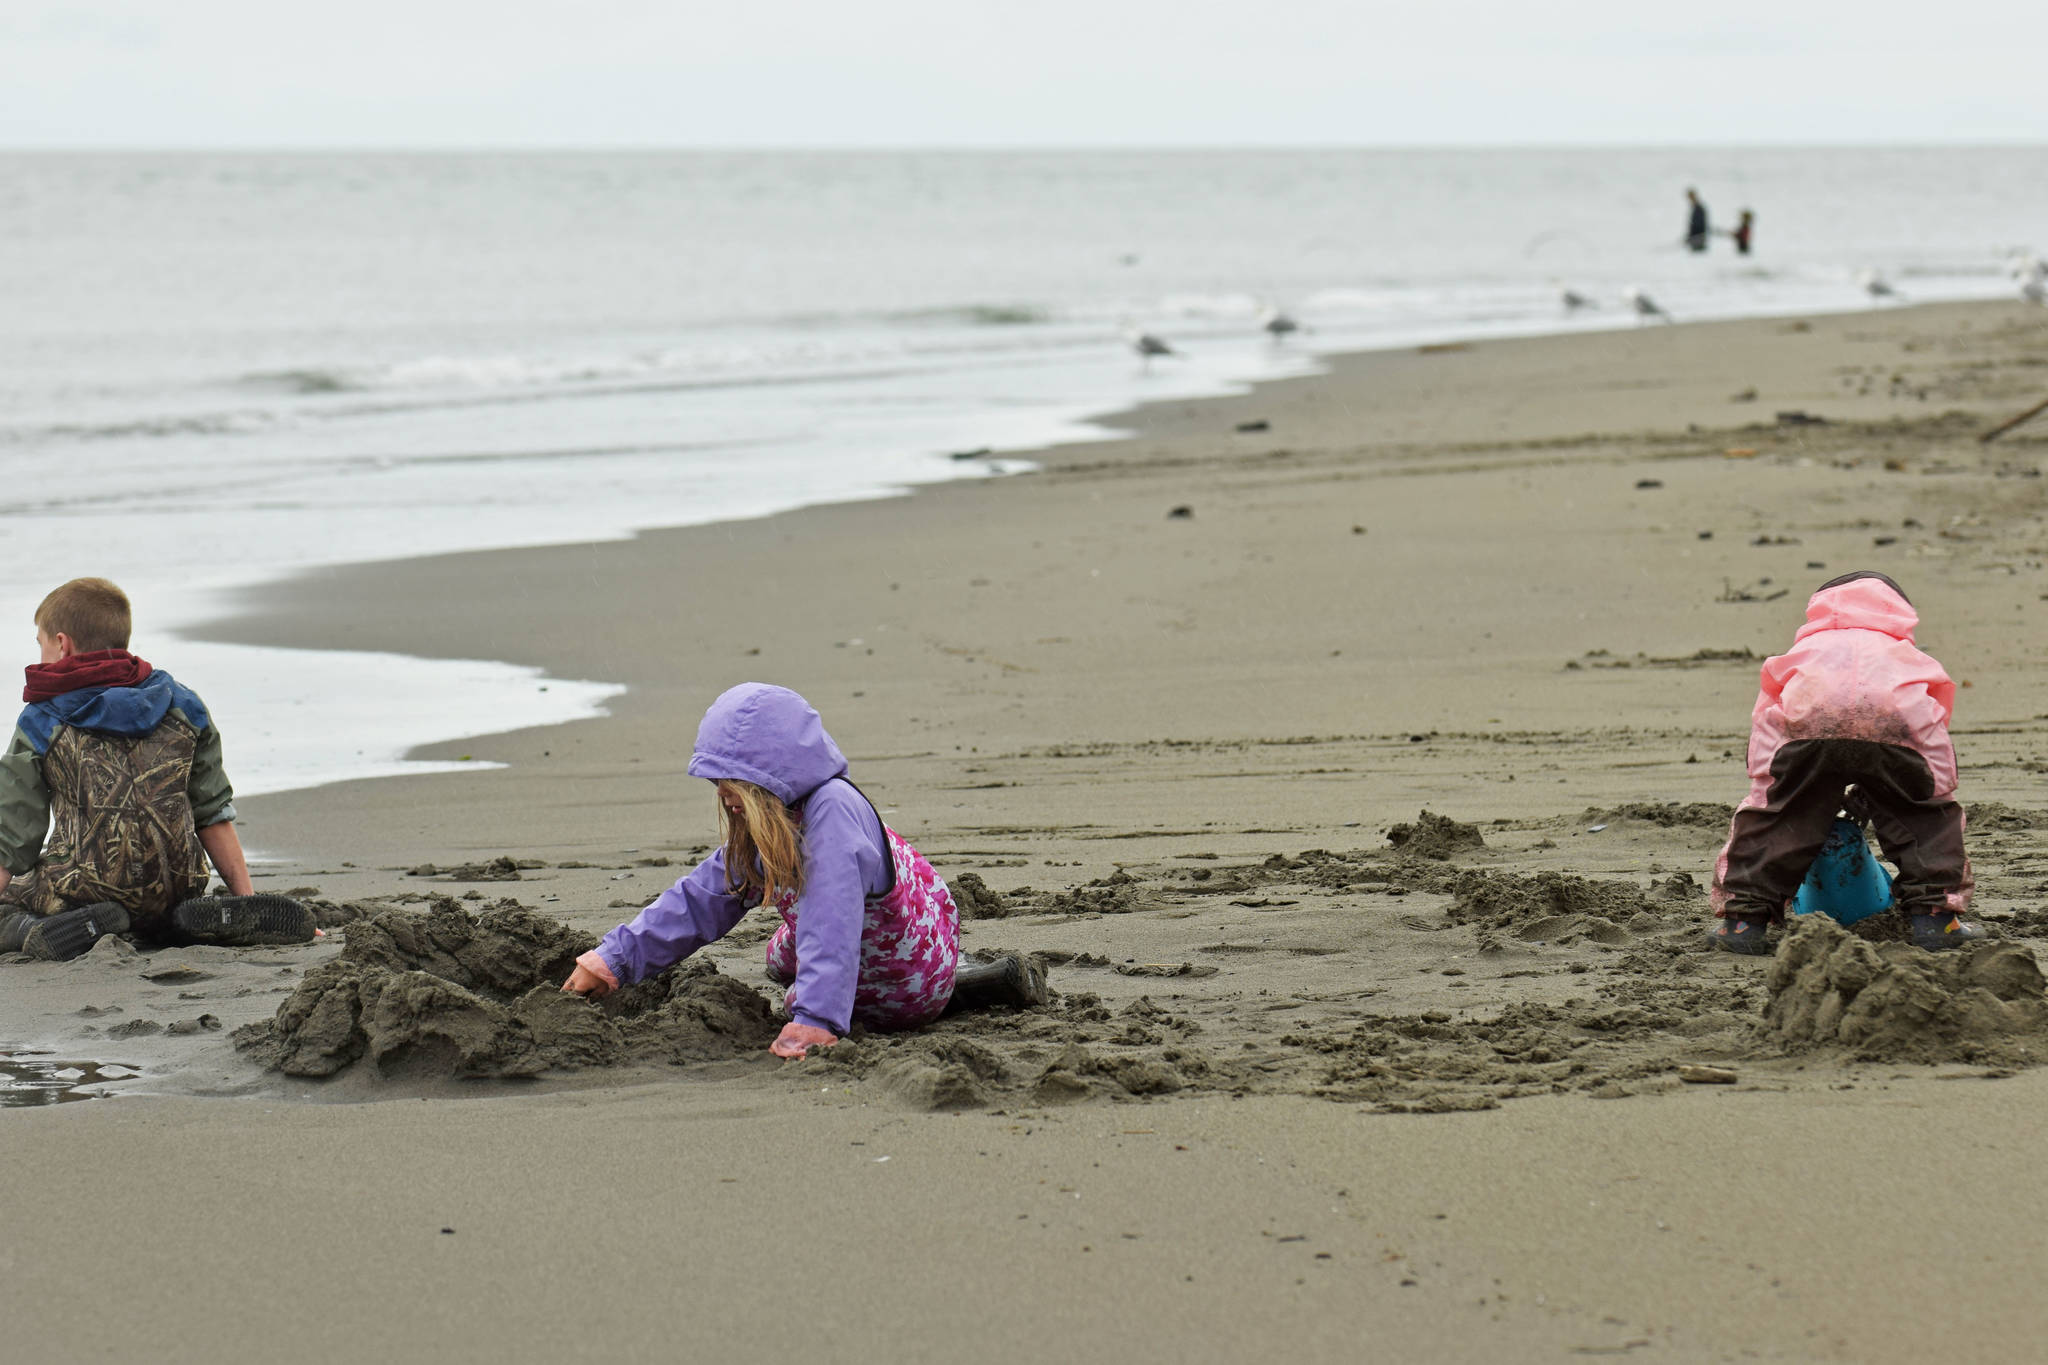 Youth play on the beach on Tuesday, July 10, 2018, during the first day of dipnetting season in Kenai, Alaska. (Photo by Erin Thompson/Peninsula Clarion)